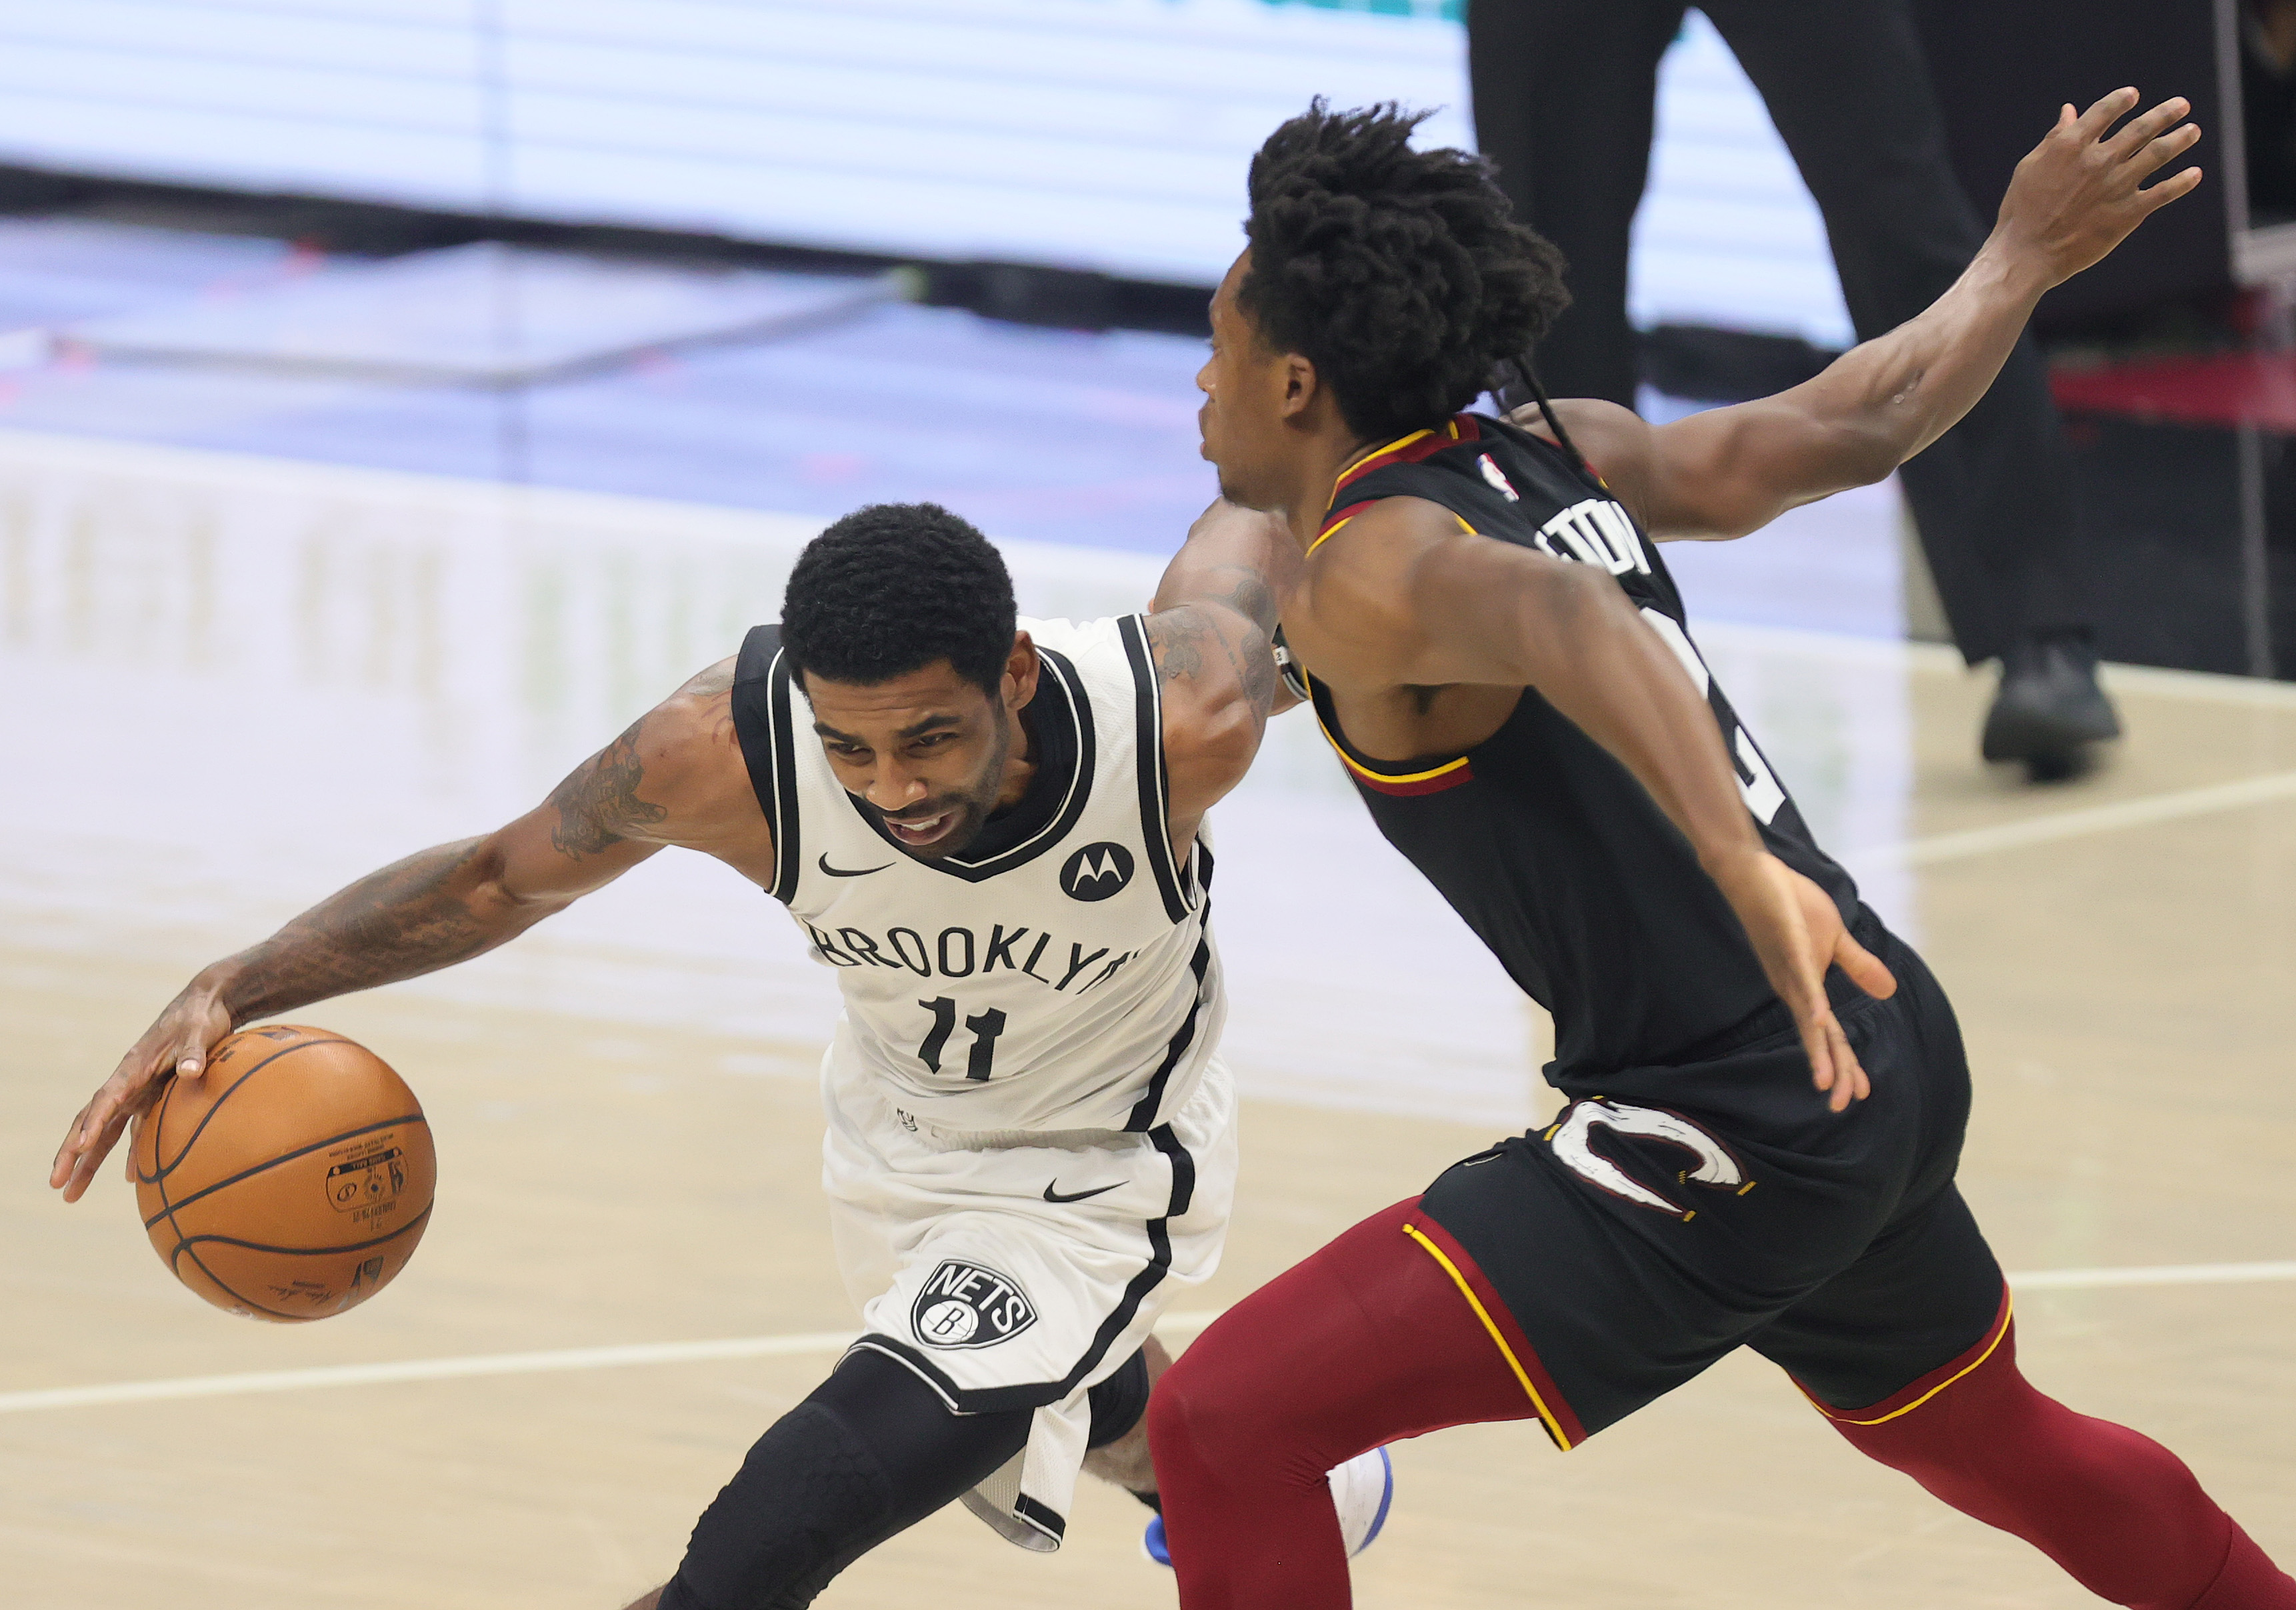 Cavaliers, Celtics Agree On Blockbuster Trade For Kyrie Irving - The Spun:  What's Trending In The Sports World Today